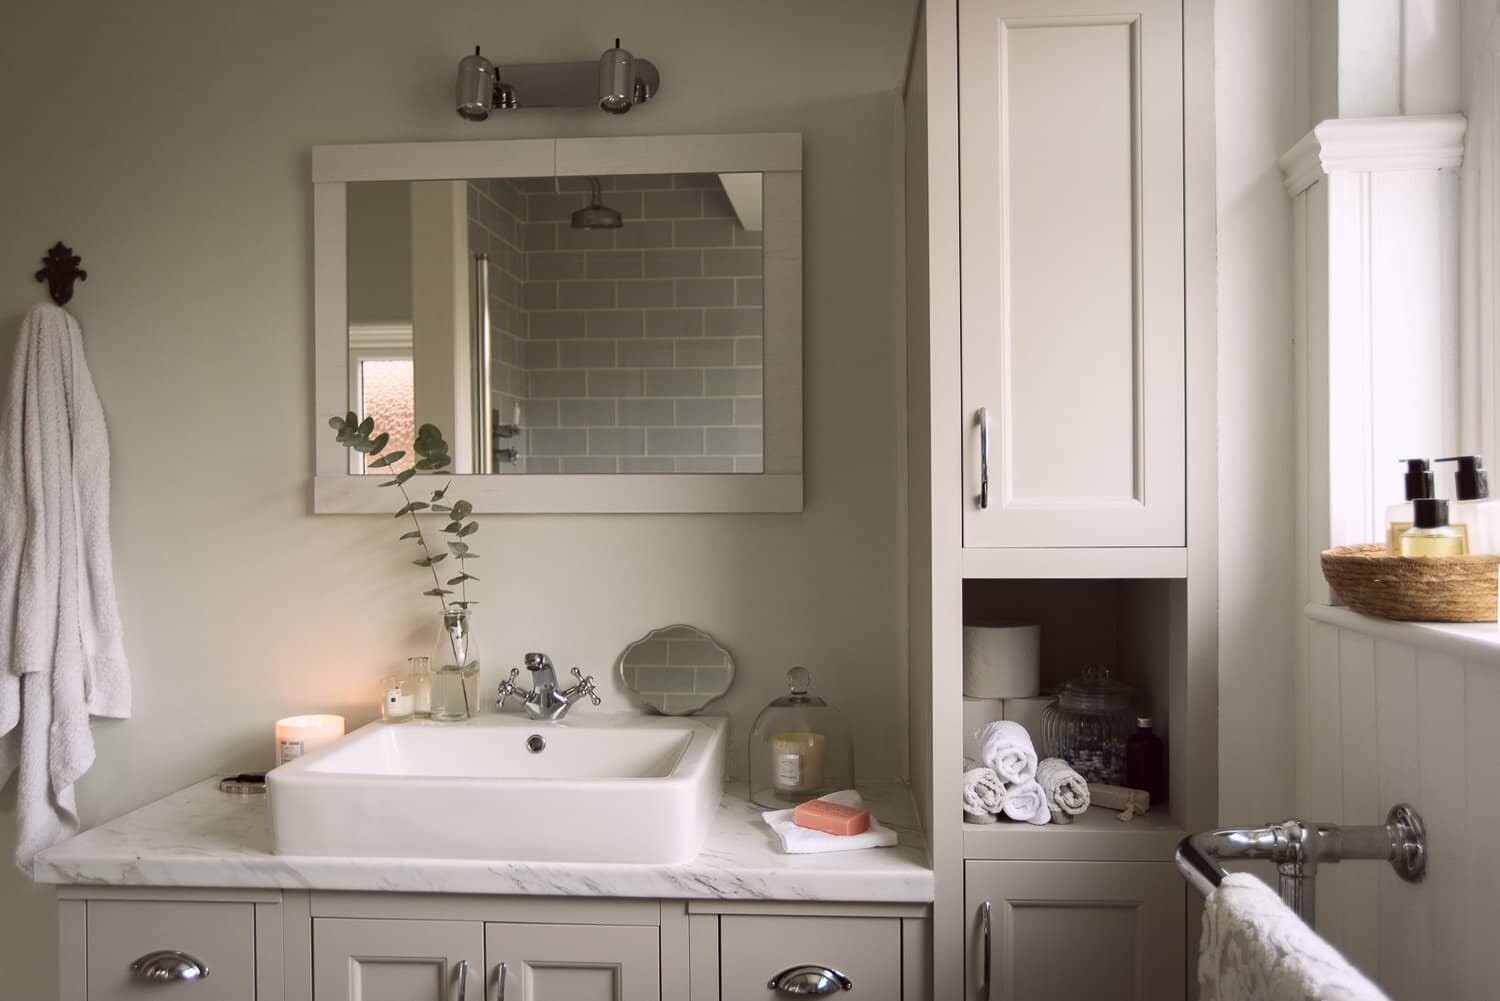 A Bathroom Renovation Cost, How Much Does It Cost To Renovate A Small Bathroom Uk